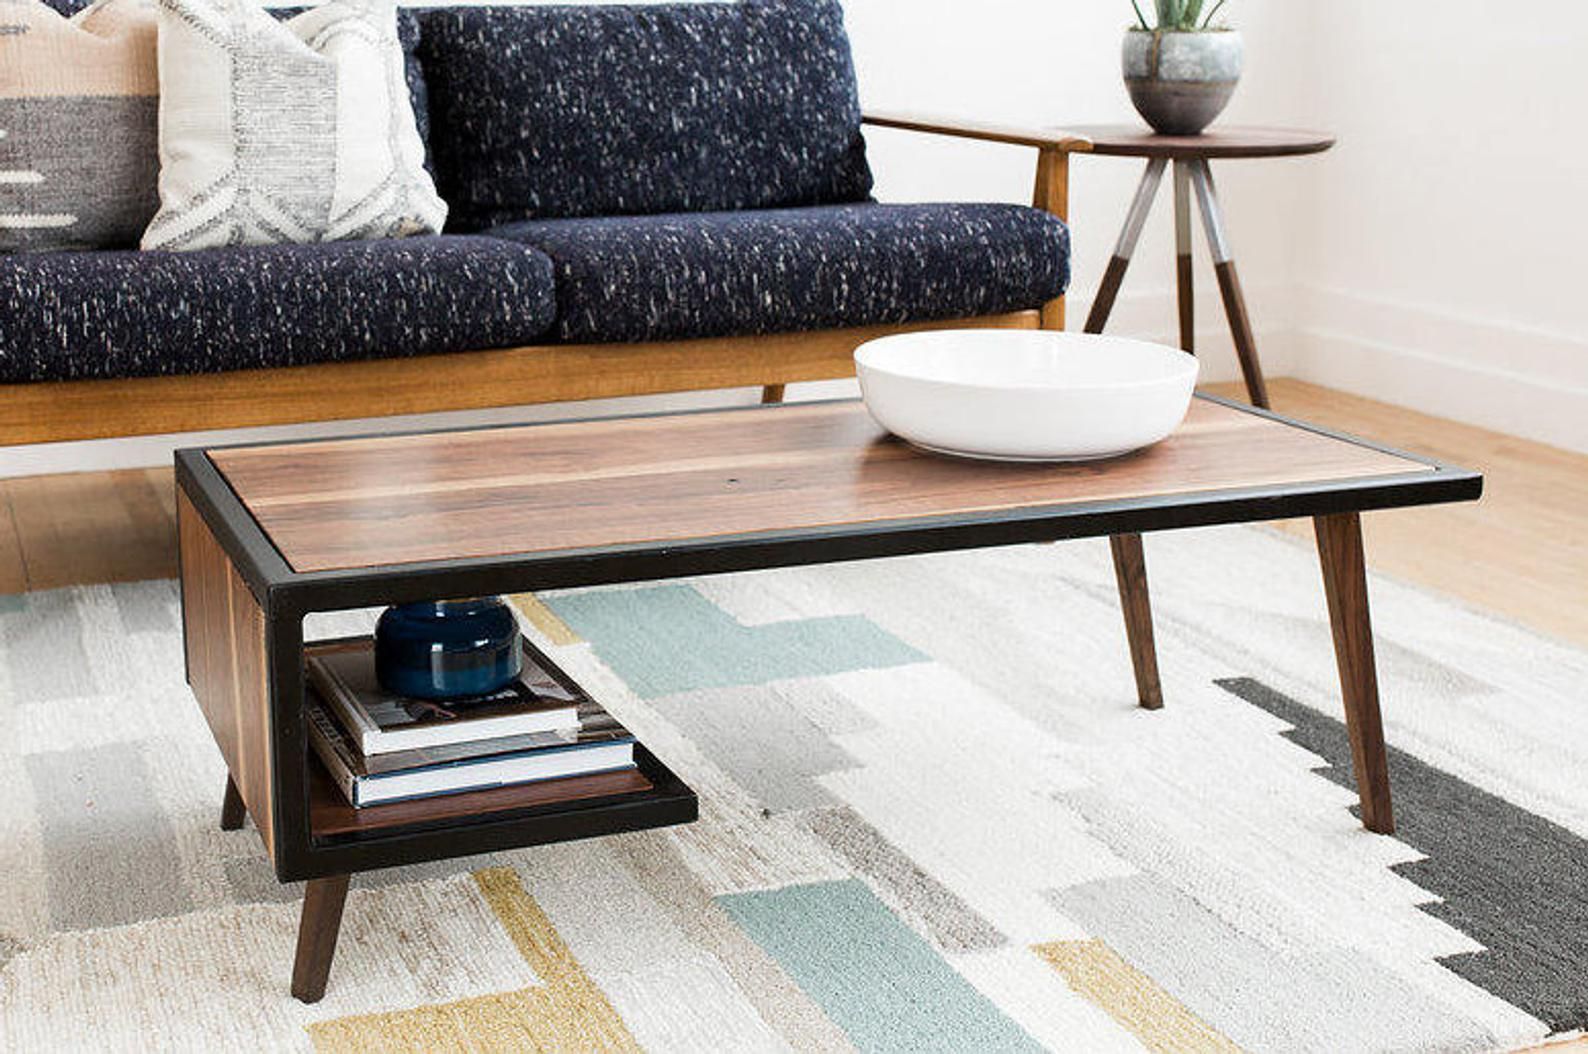 Mid Century Modern Style Coffee Tables You'll Love – Home With Mid Century Modern Coffee Tables (View 6 of 20)